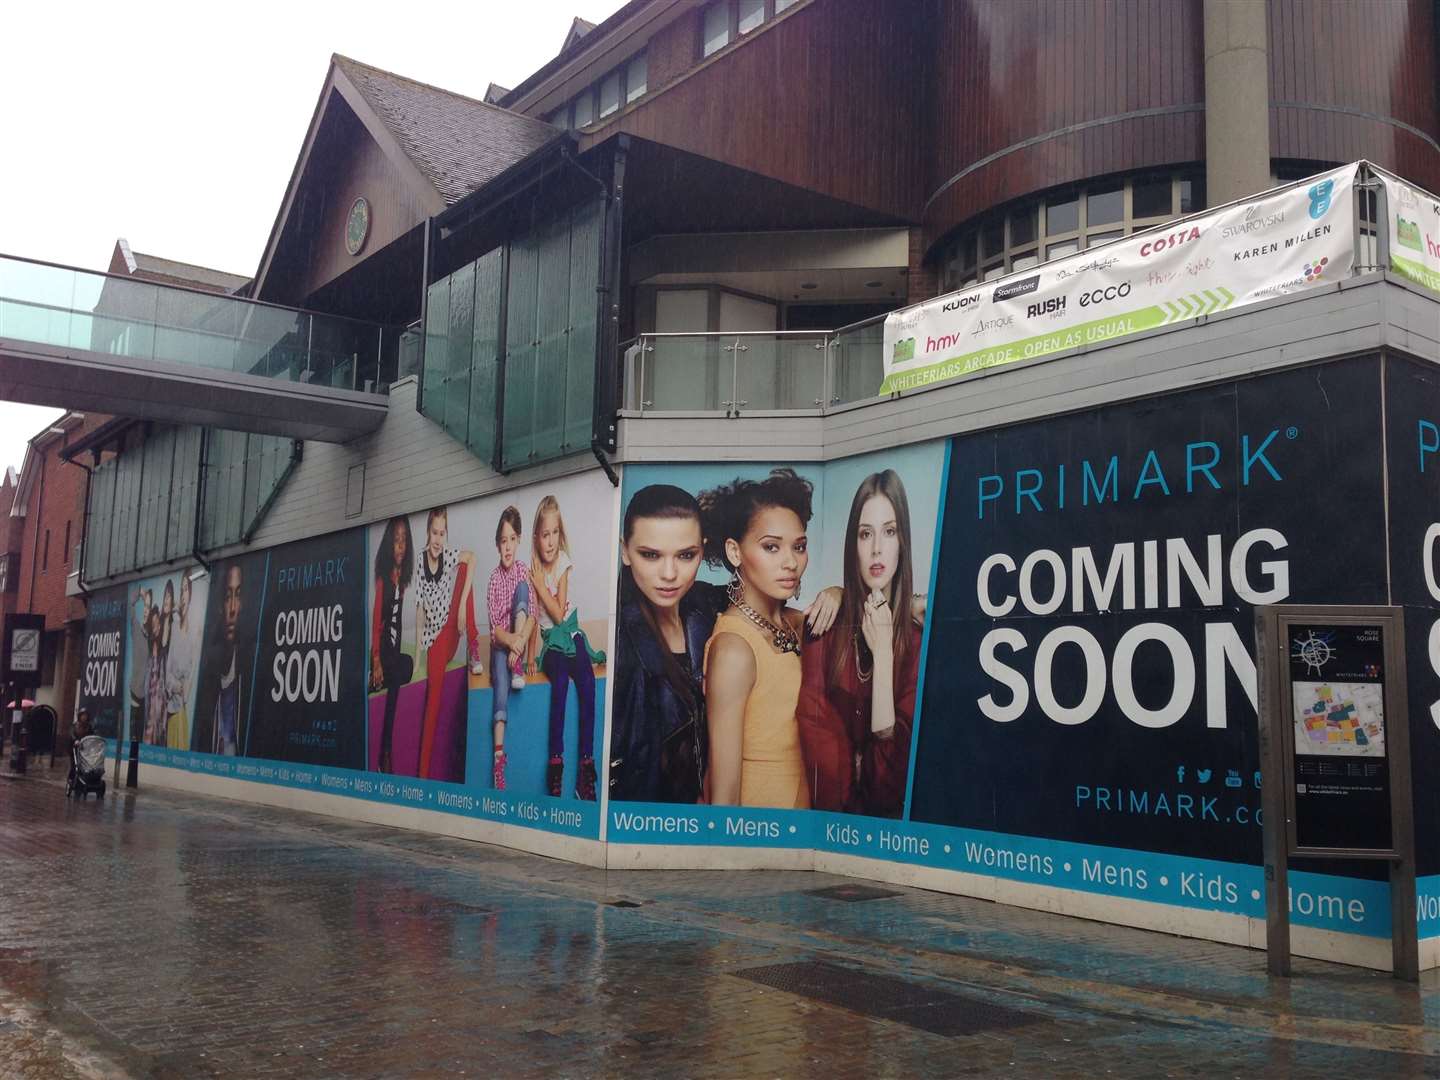 The new Primark store opens in Whitefriars in 2014